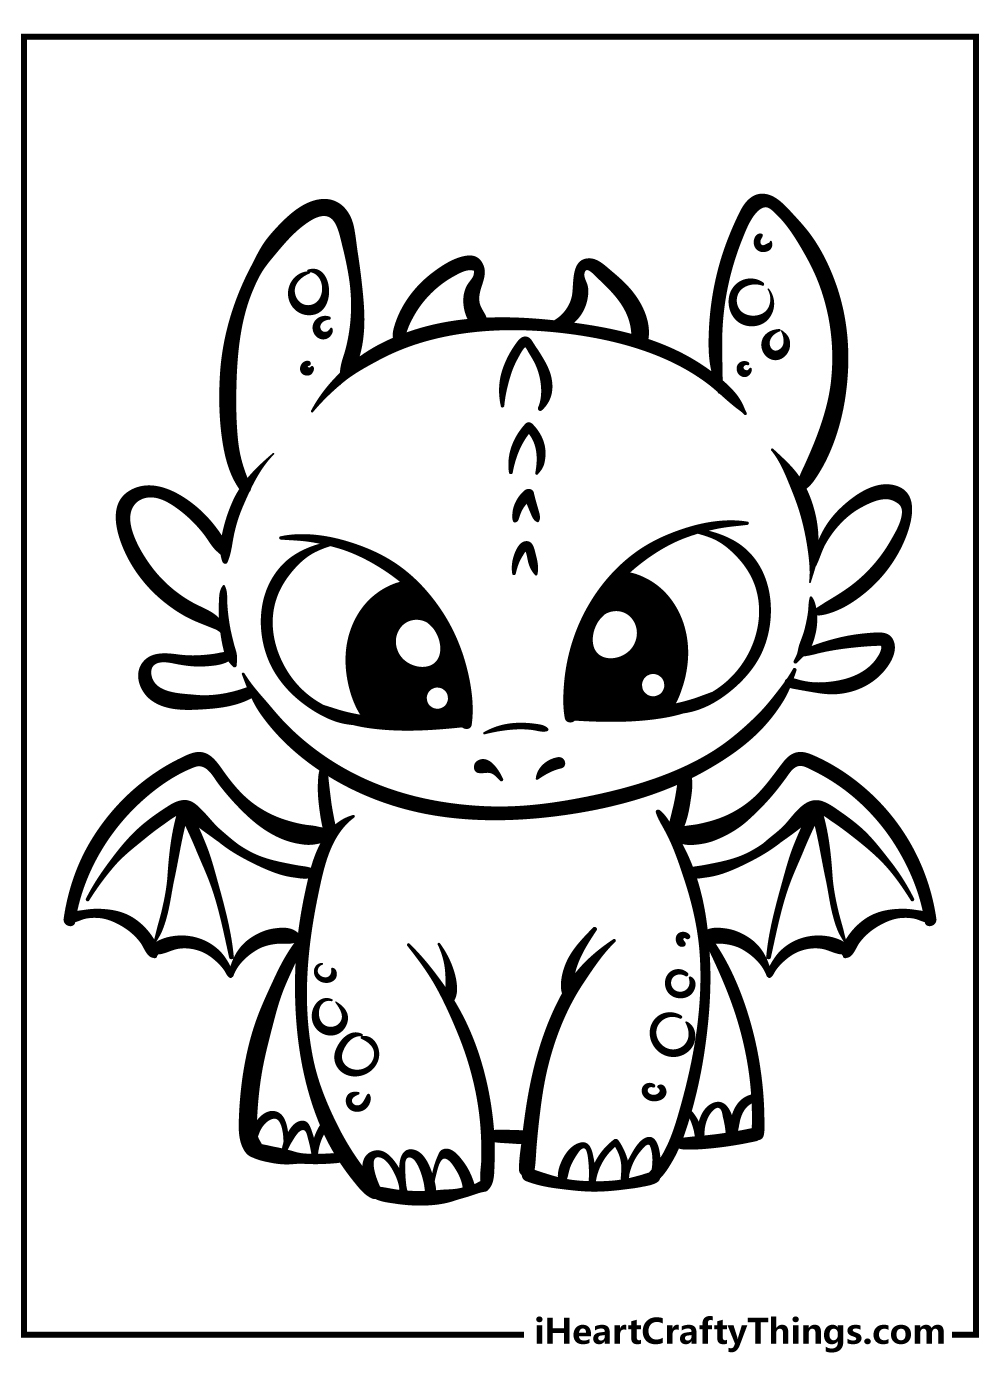 How To Train Your Dragon Coloring Pages for adults free printable